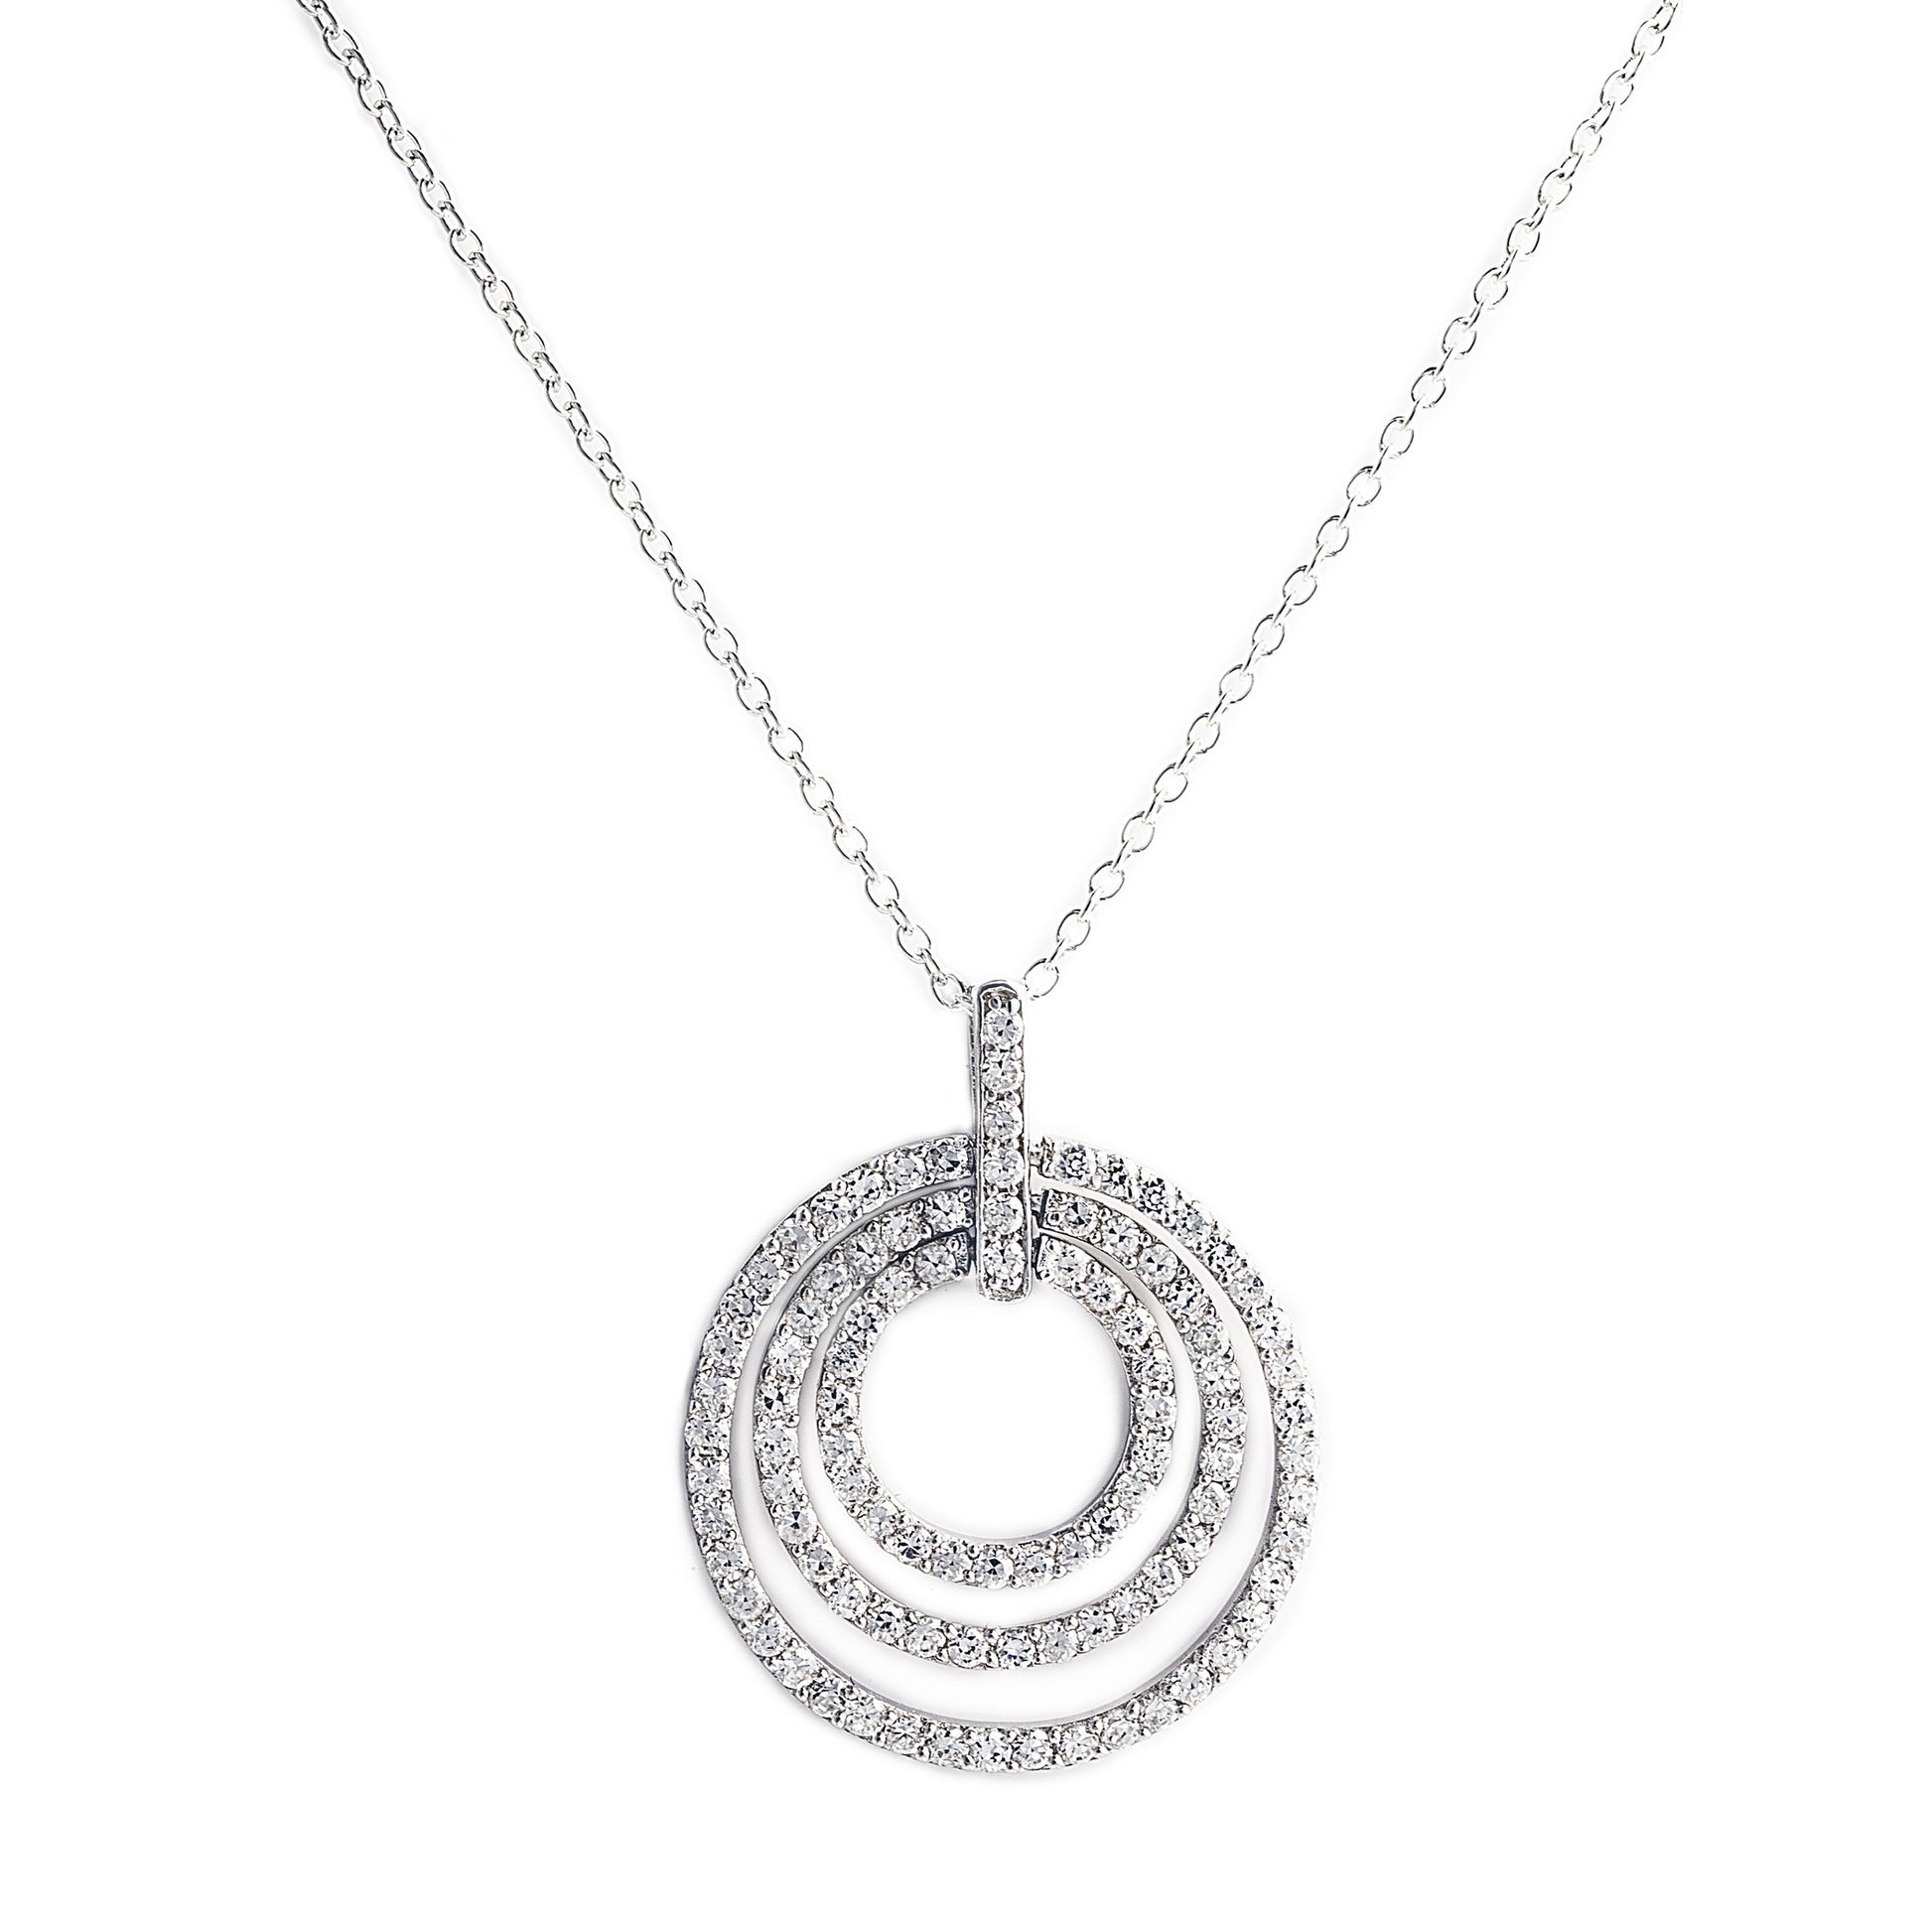 Mariah Necklace in 925 Sterling Silver, with three rings encrusted with cubic zirconia stones. Worldwide shipping. Affordable luxury jewellery by Bellagio & Co.